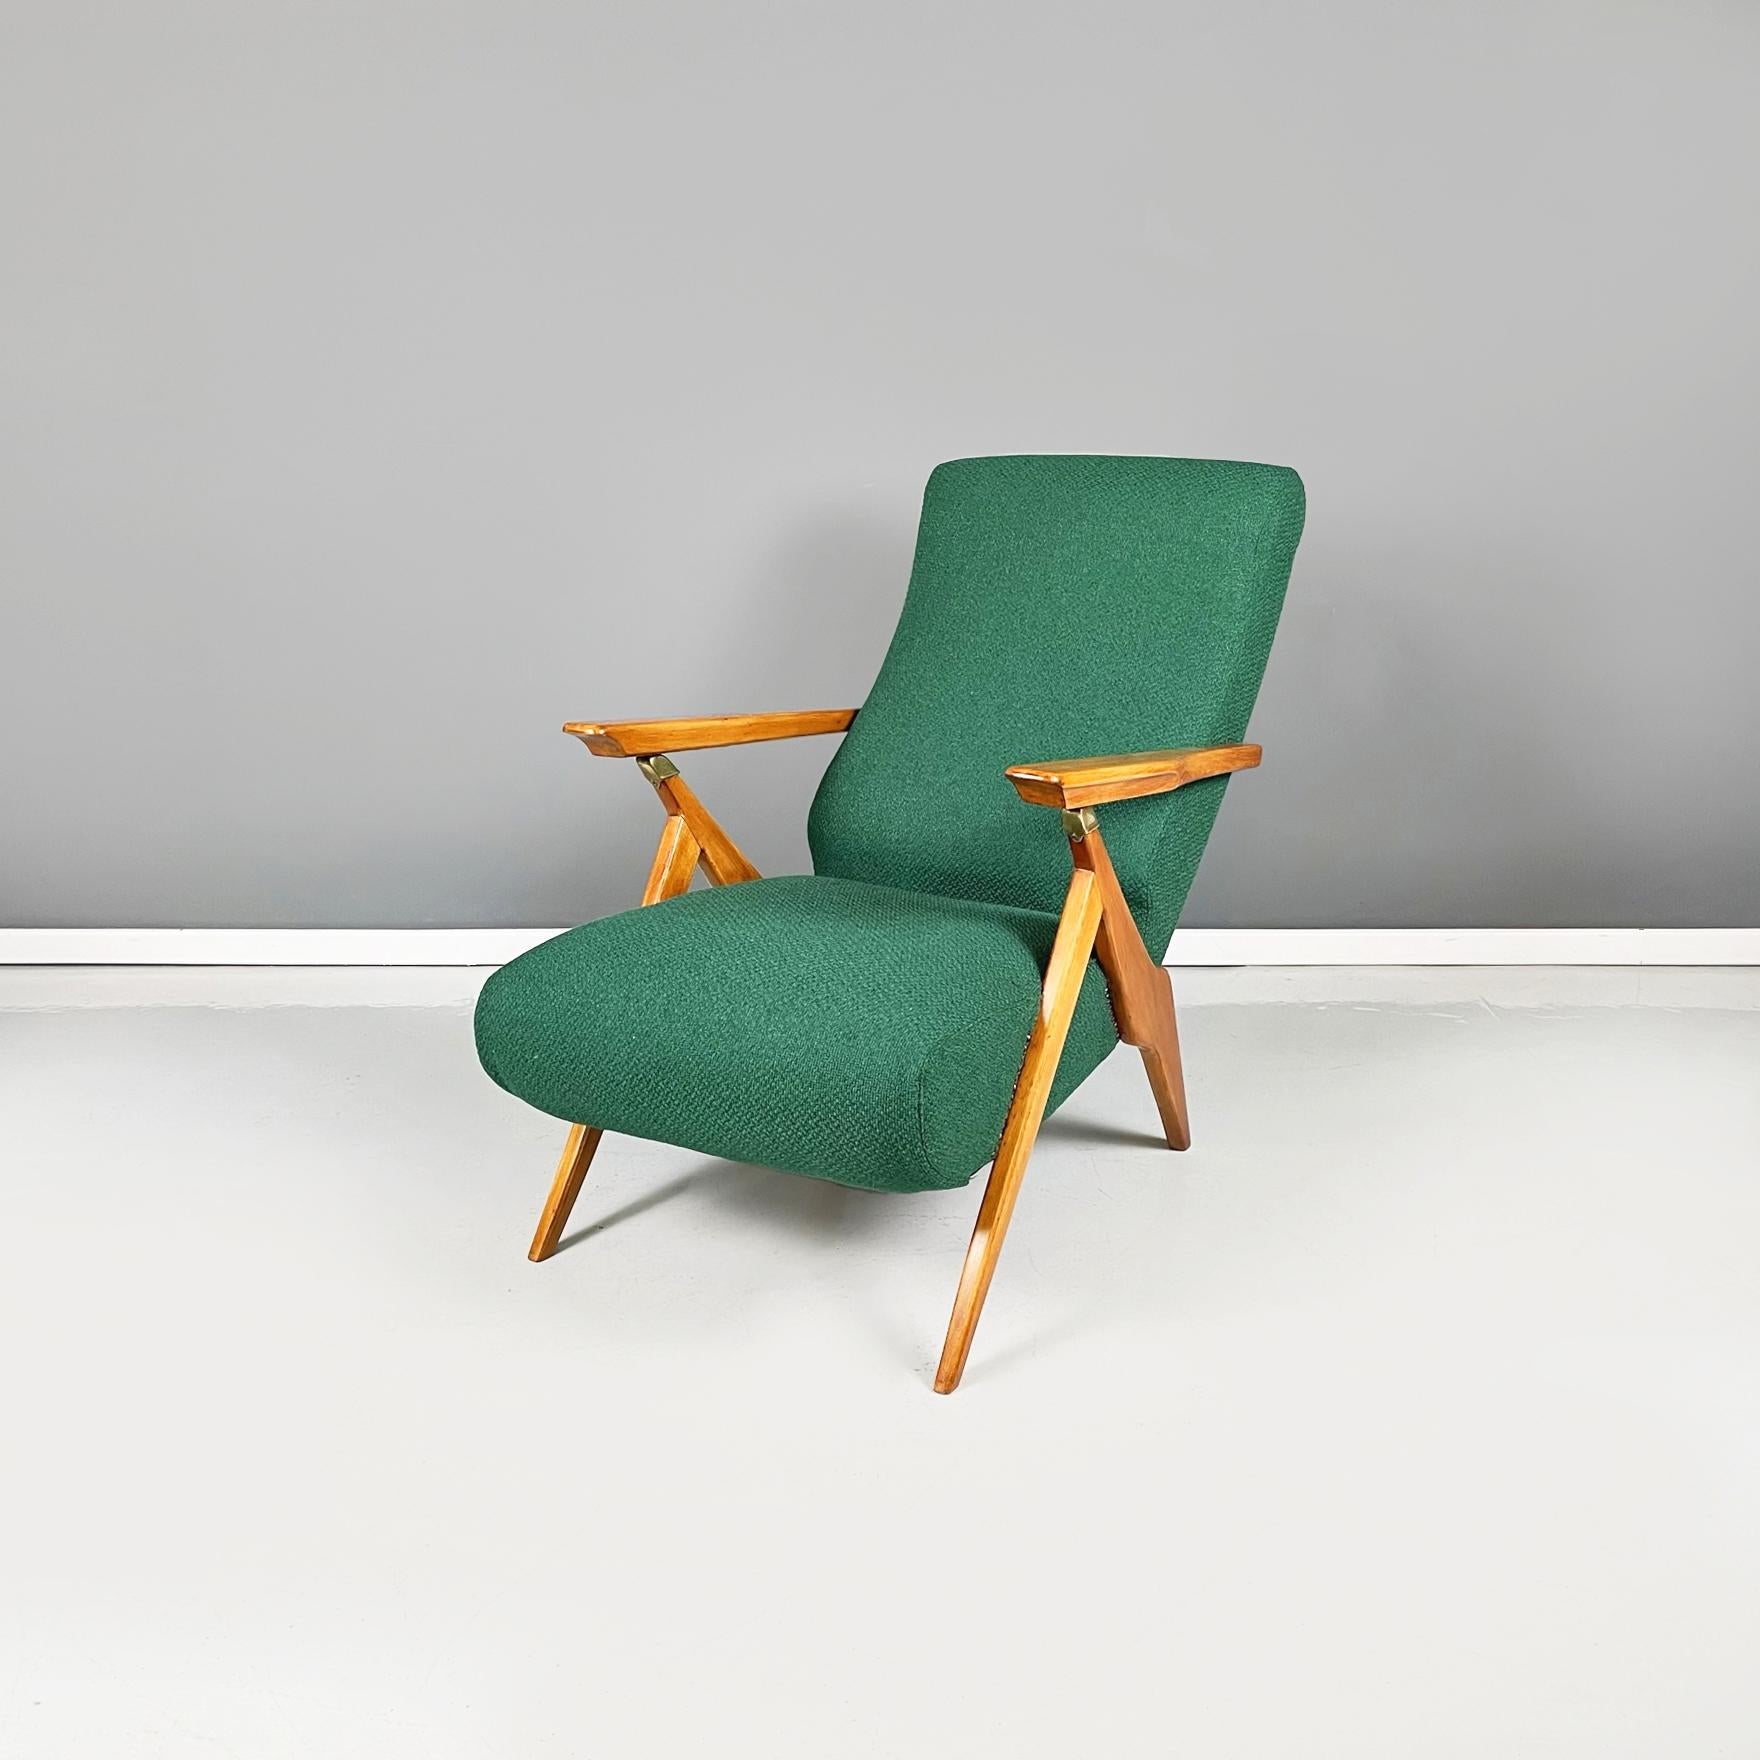 Italian midcentury green fabric and wood Reclining armchair by Antonio Gorgone, 1955.
Reclining armchair with seat and back padded and covered in forest green cotton fabric. The wooden armrests with brass details can be raised to change the angle